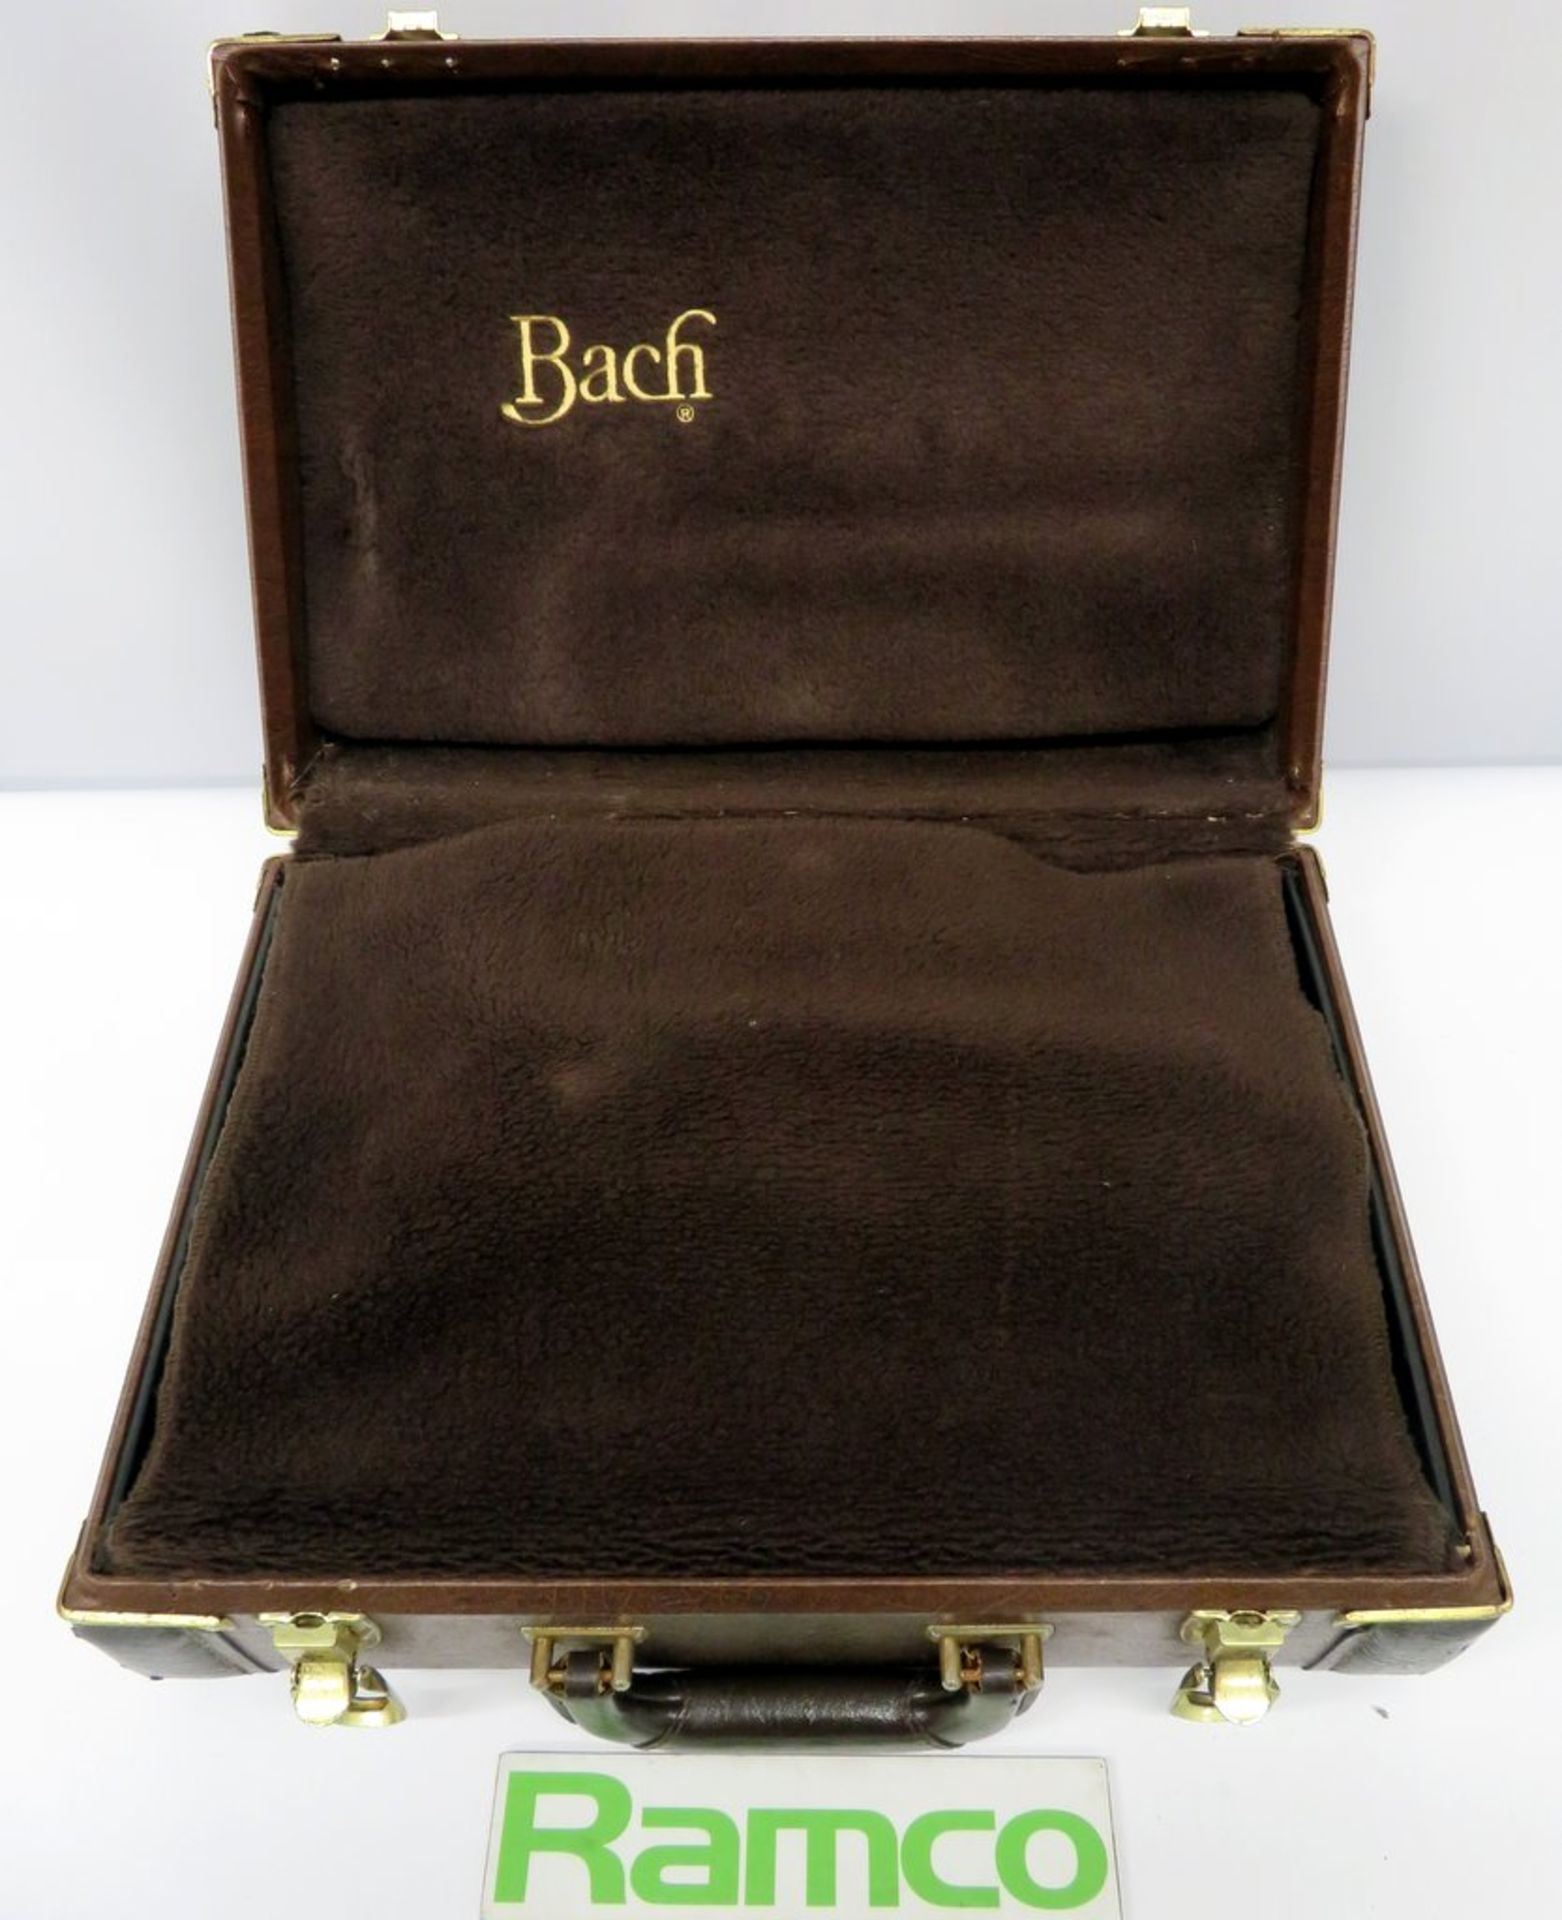 Bach Stradivarius 184 Cornet Complete With Case. - Image 15 of 16